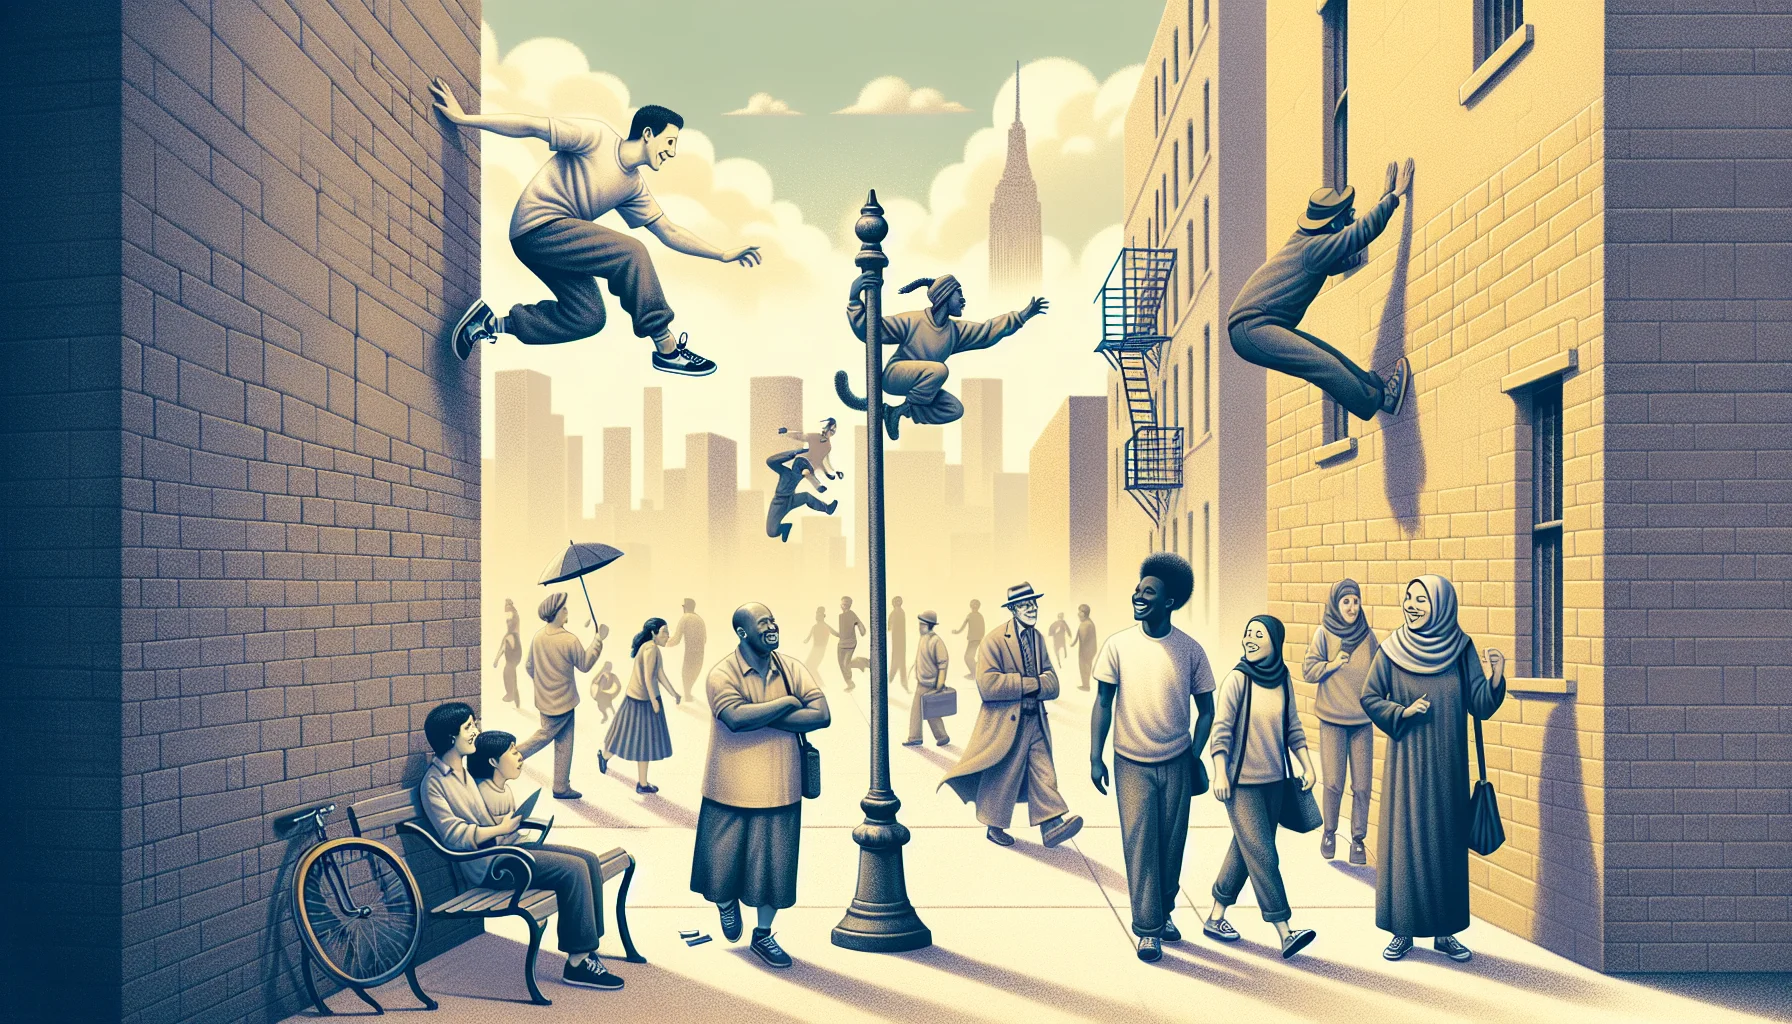 Imagine an amusing street scene where three individuals of various descent and both genders are engaged in parkour. The first individual, a Hispanic male, is fluidly running sideways on a wall like a squirrel, eliciting chuckles from onlookers. The second performer, a Black female, is performing a lingering handstand on top of a lamp post, causing onlookers to get curious about exercising. The third person, a Middle-Eastern male, is trying to leap between two tall ledges but his baggy pants are hilariously caught on a flagpole, making him swing precariously. The scene is whimsical and contagious, subtly inviting viewers to be active and enjoy exercise in a fun way.